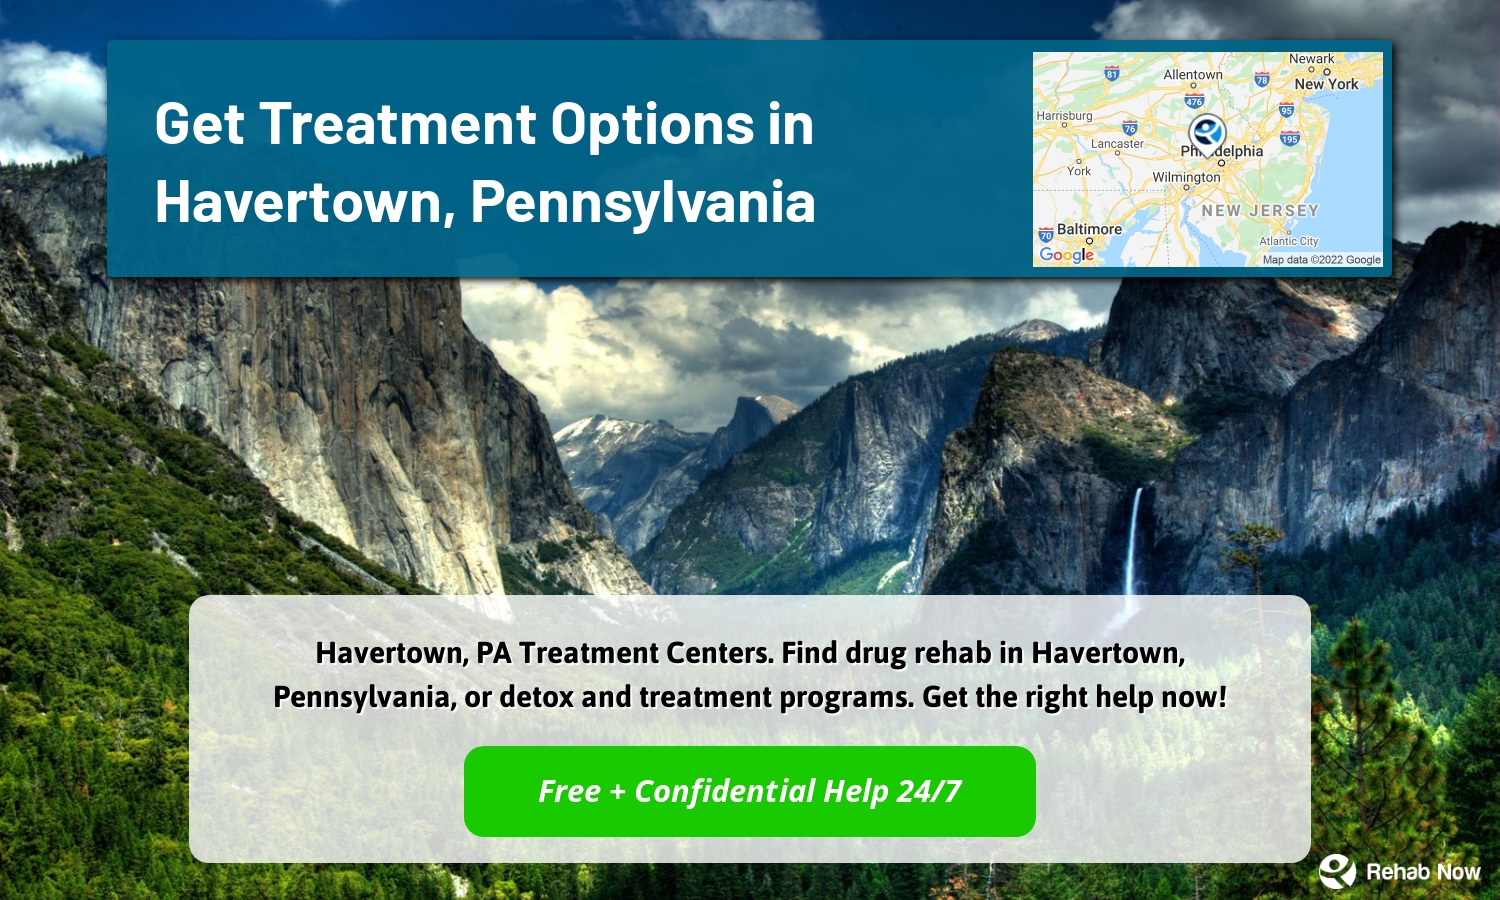 Havertown, PA Treatment Centers. Find drug rehab in Havertown, Pennsylvania, or detox and treatment programs. Get the right help now!